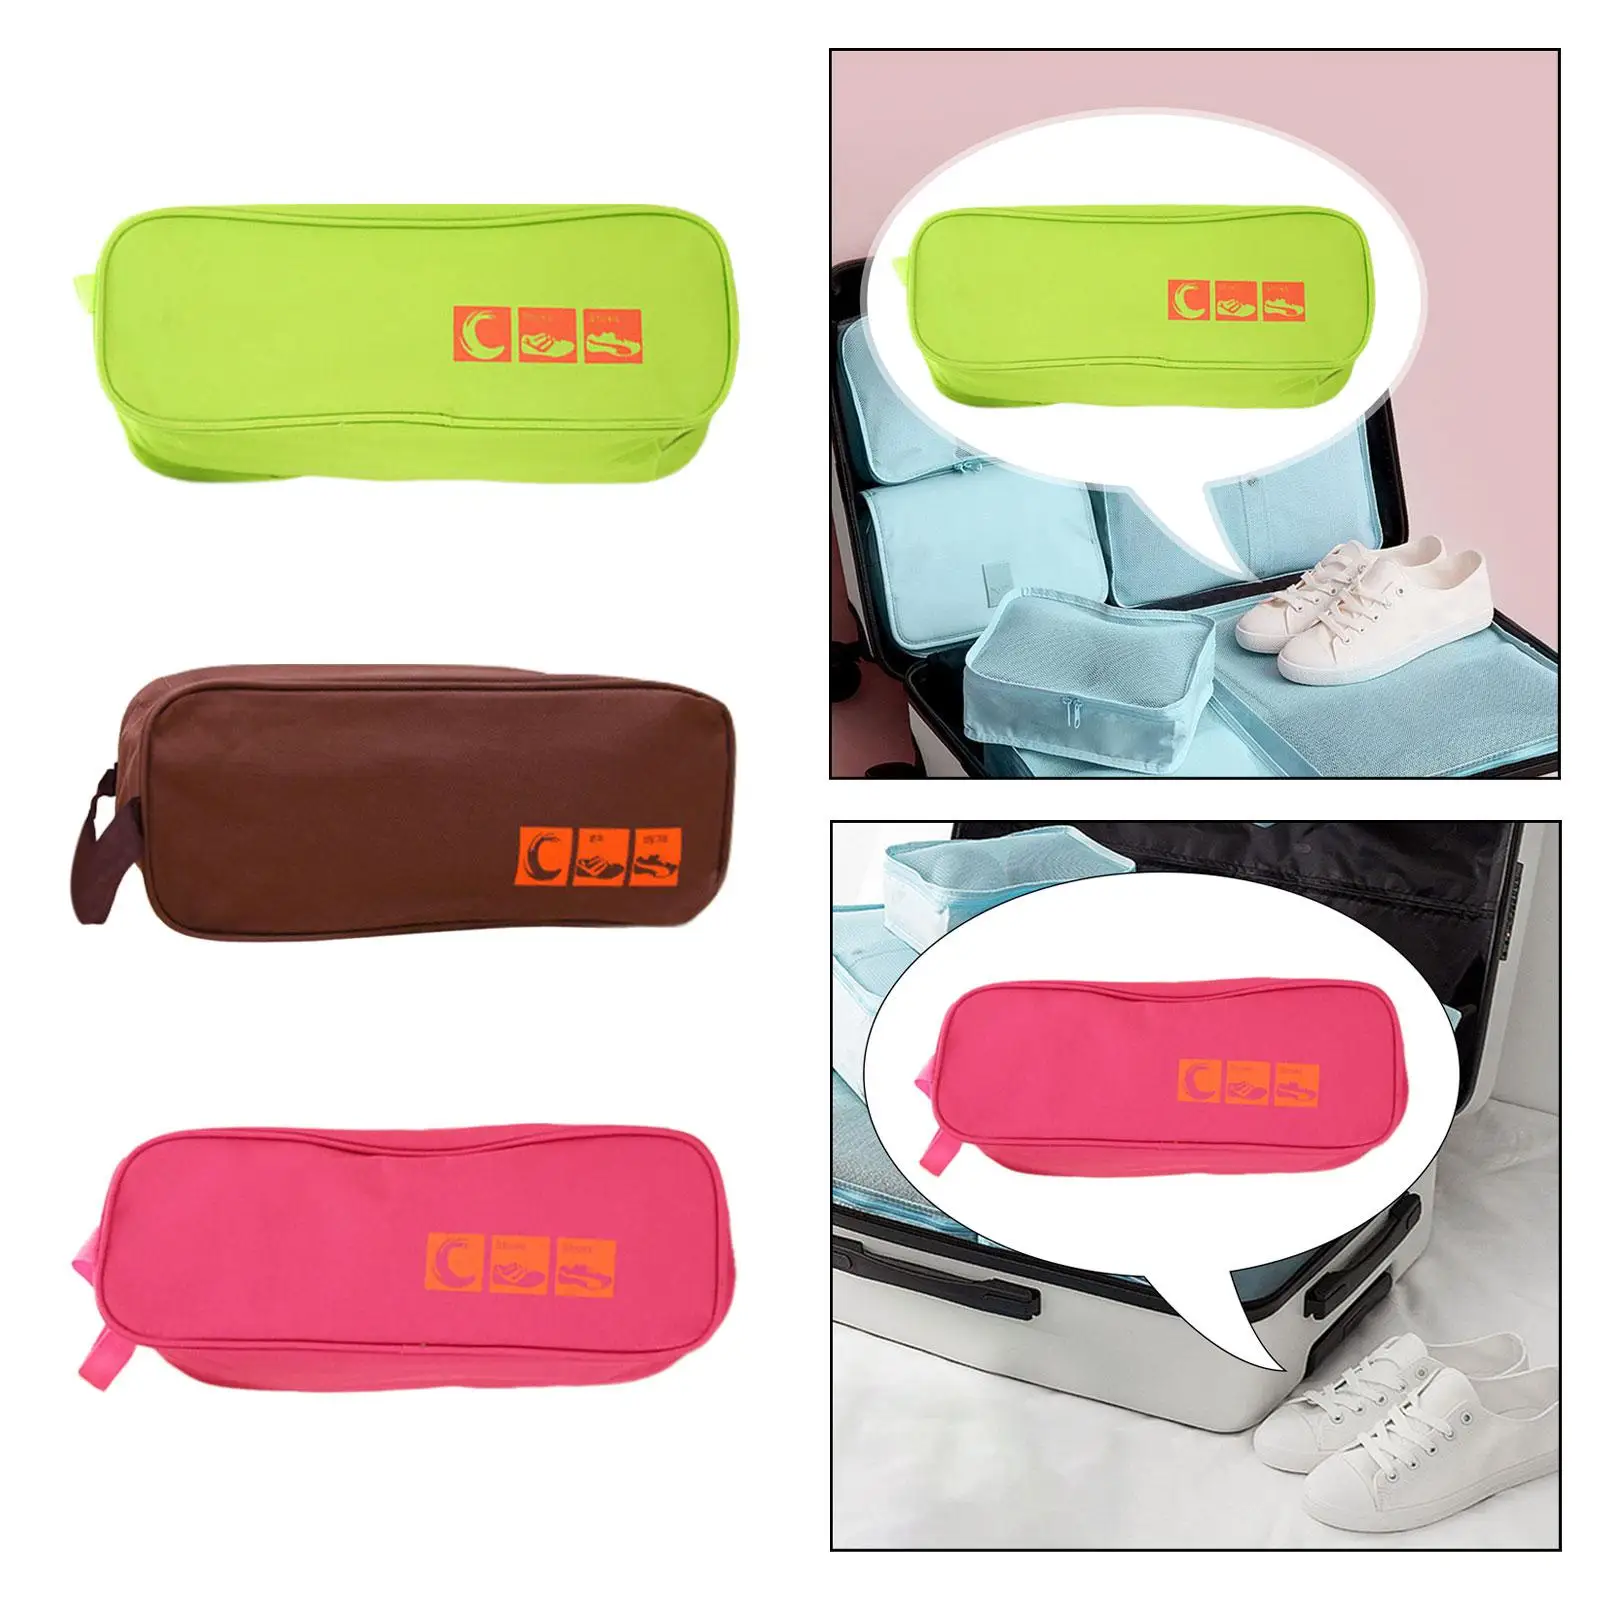 Travel Shoe Bag for Packing Water Resistant Dustproof Shoe Pouches for Traveling Shoe Organizer Bag for Trip Home Luggage Sports